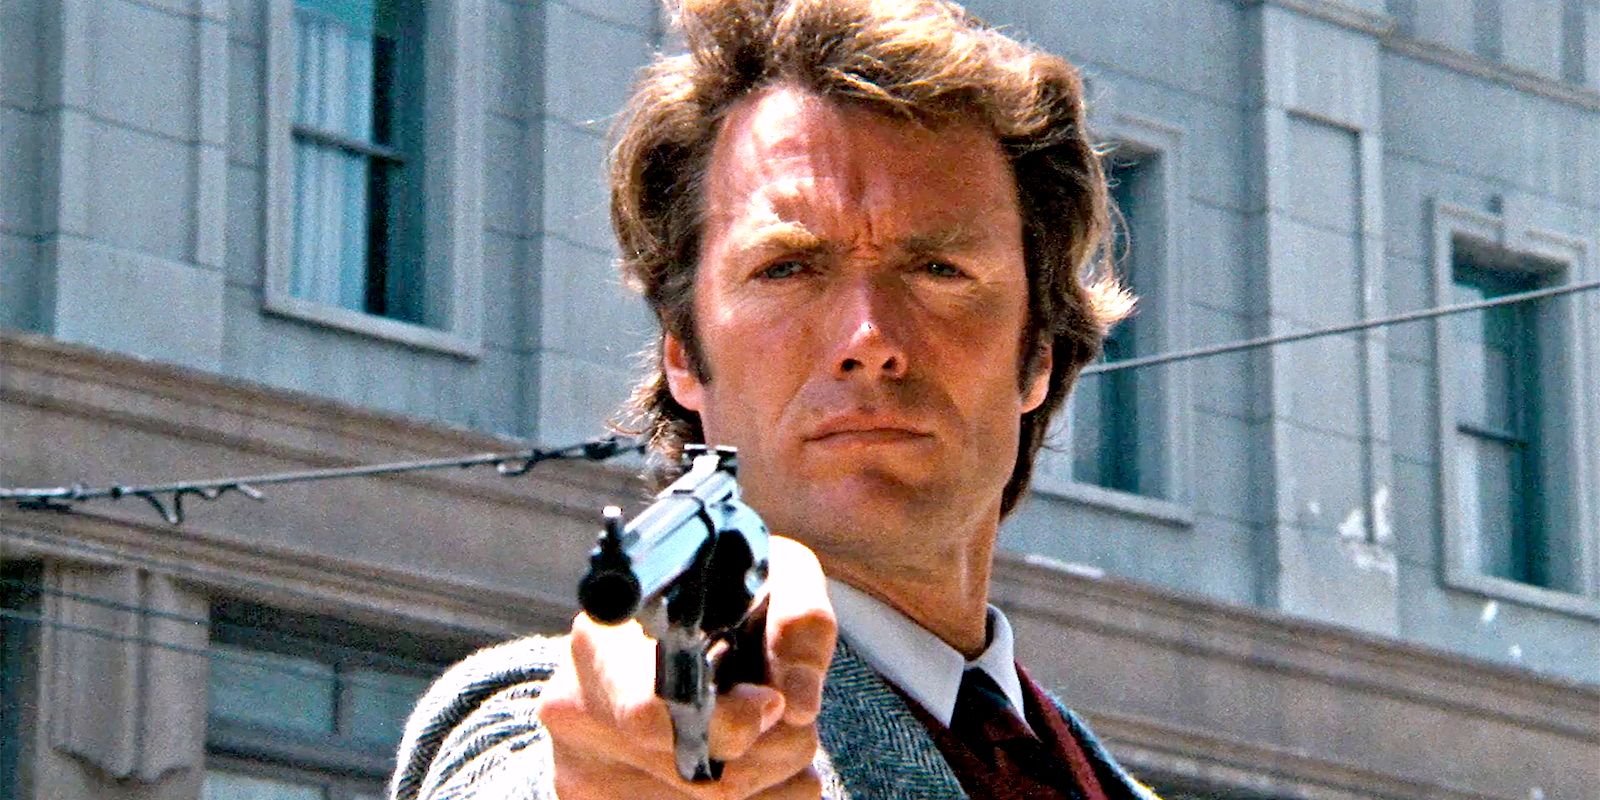 Harry Callhan pointing a gun in Dirty Harry.